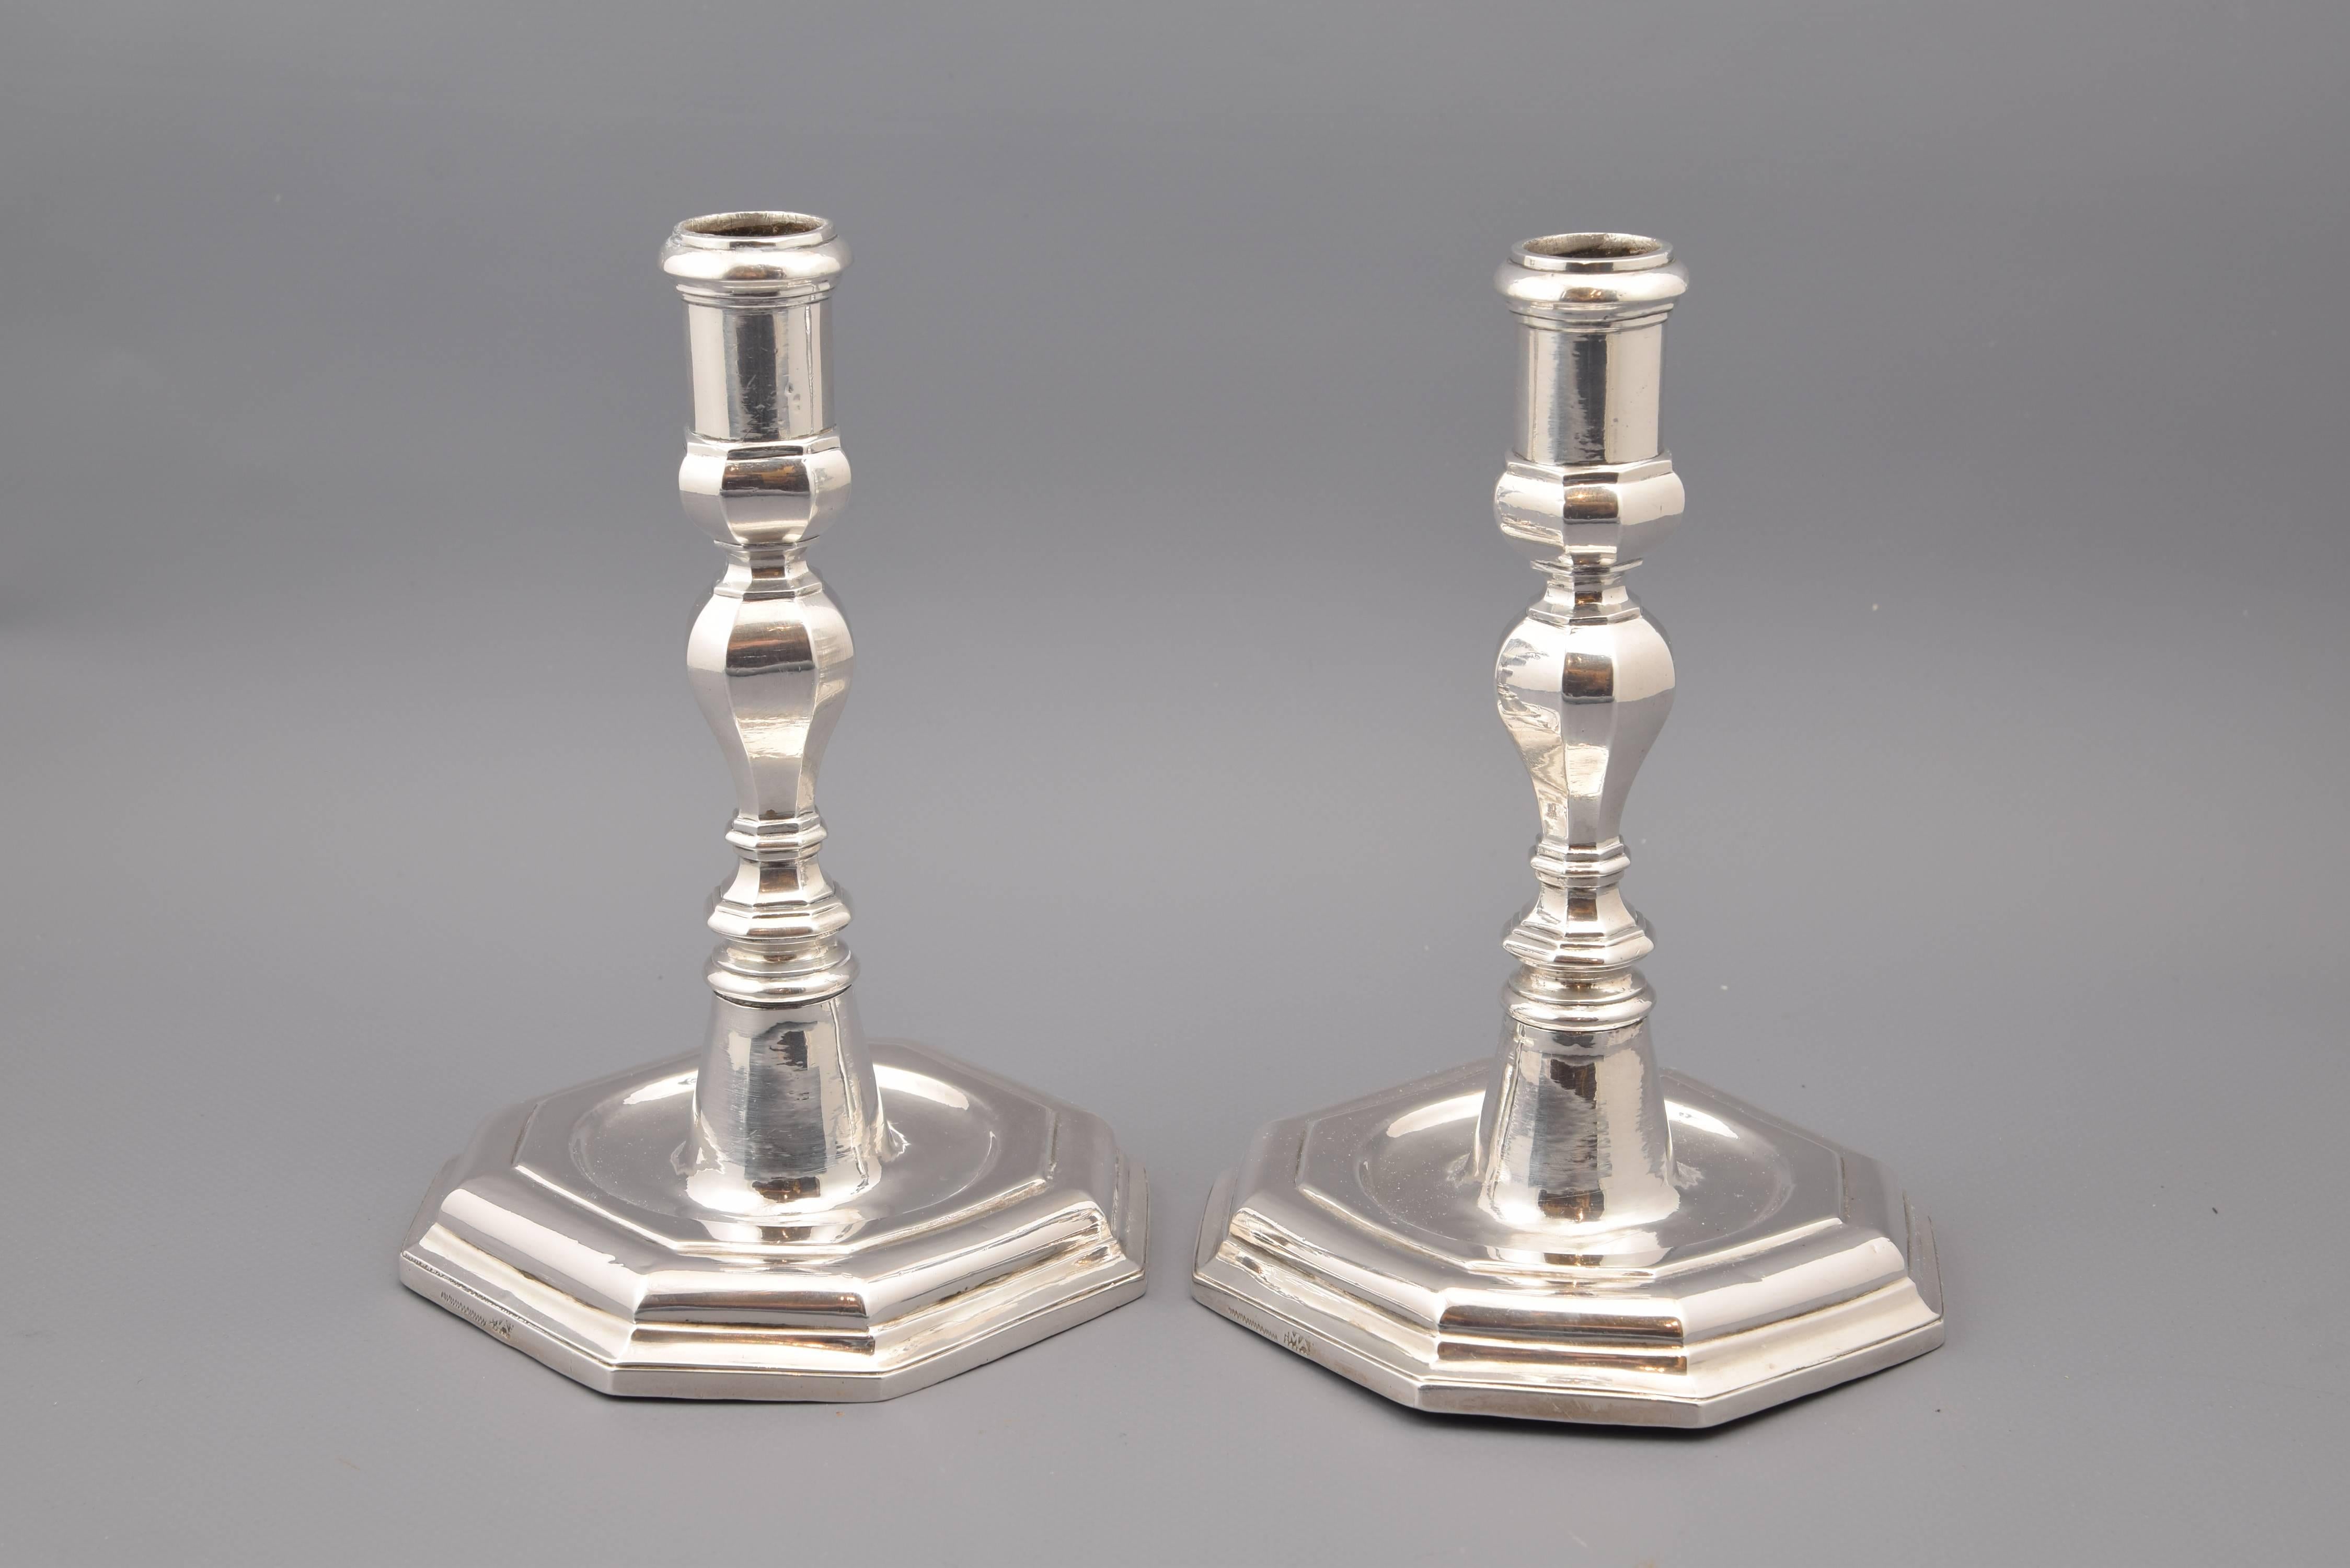 Pair of silver candleholders. Mallorca, Spain, circa second half of the 18th century.
With hallmarks.
The pieces have a burling mark and a contrast mark on the front of the base. The second places the creation of the candelabra in Mallorca. The